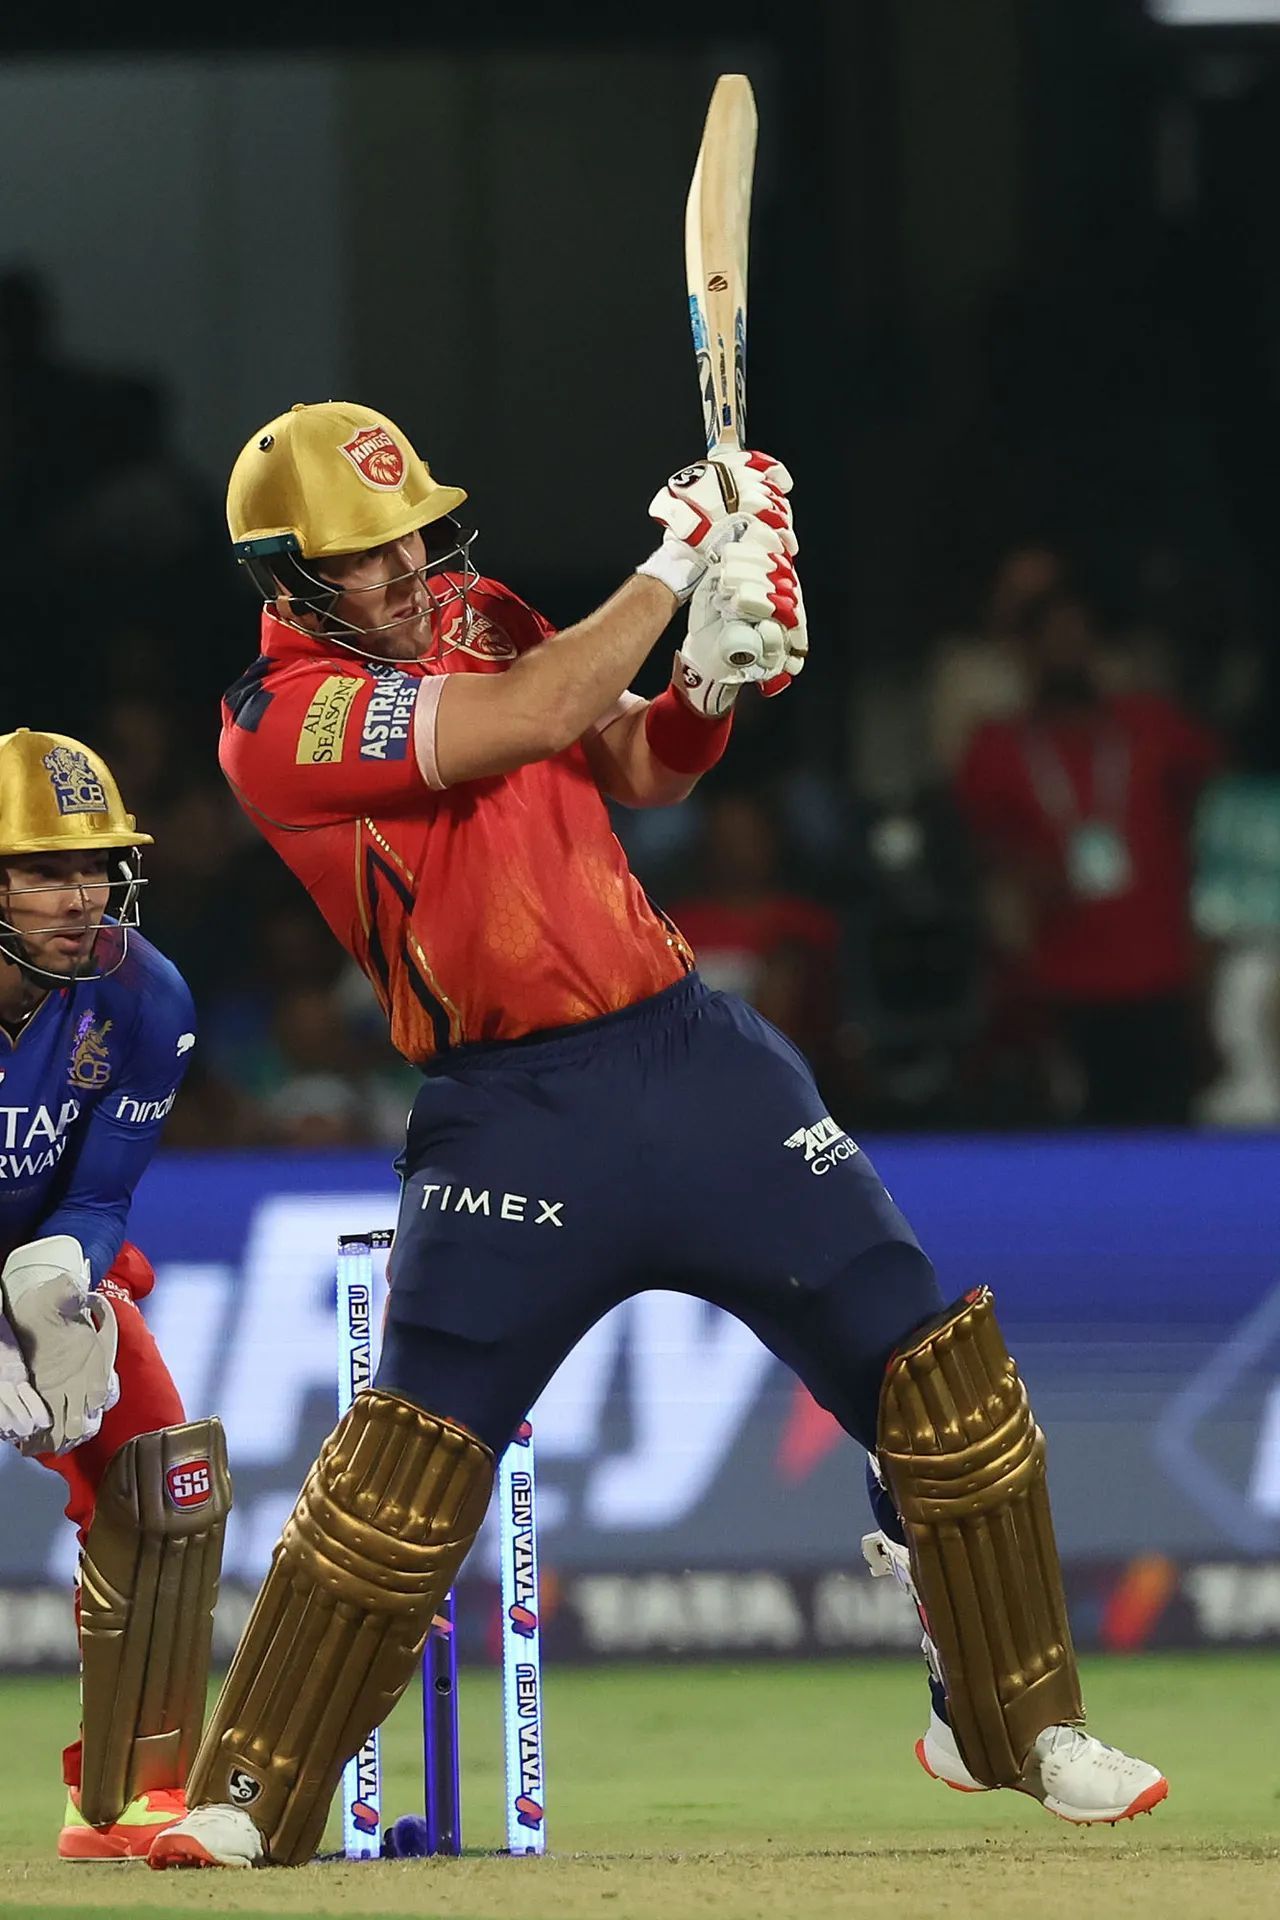 Liam Livingstone in action (Credits: IPL)